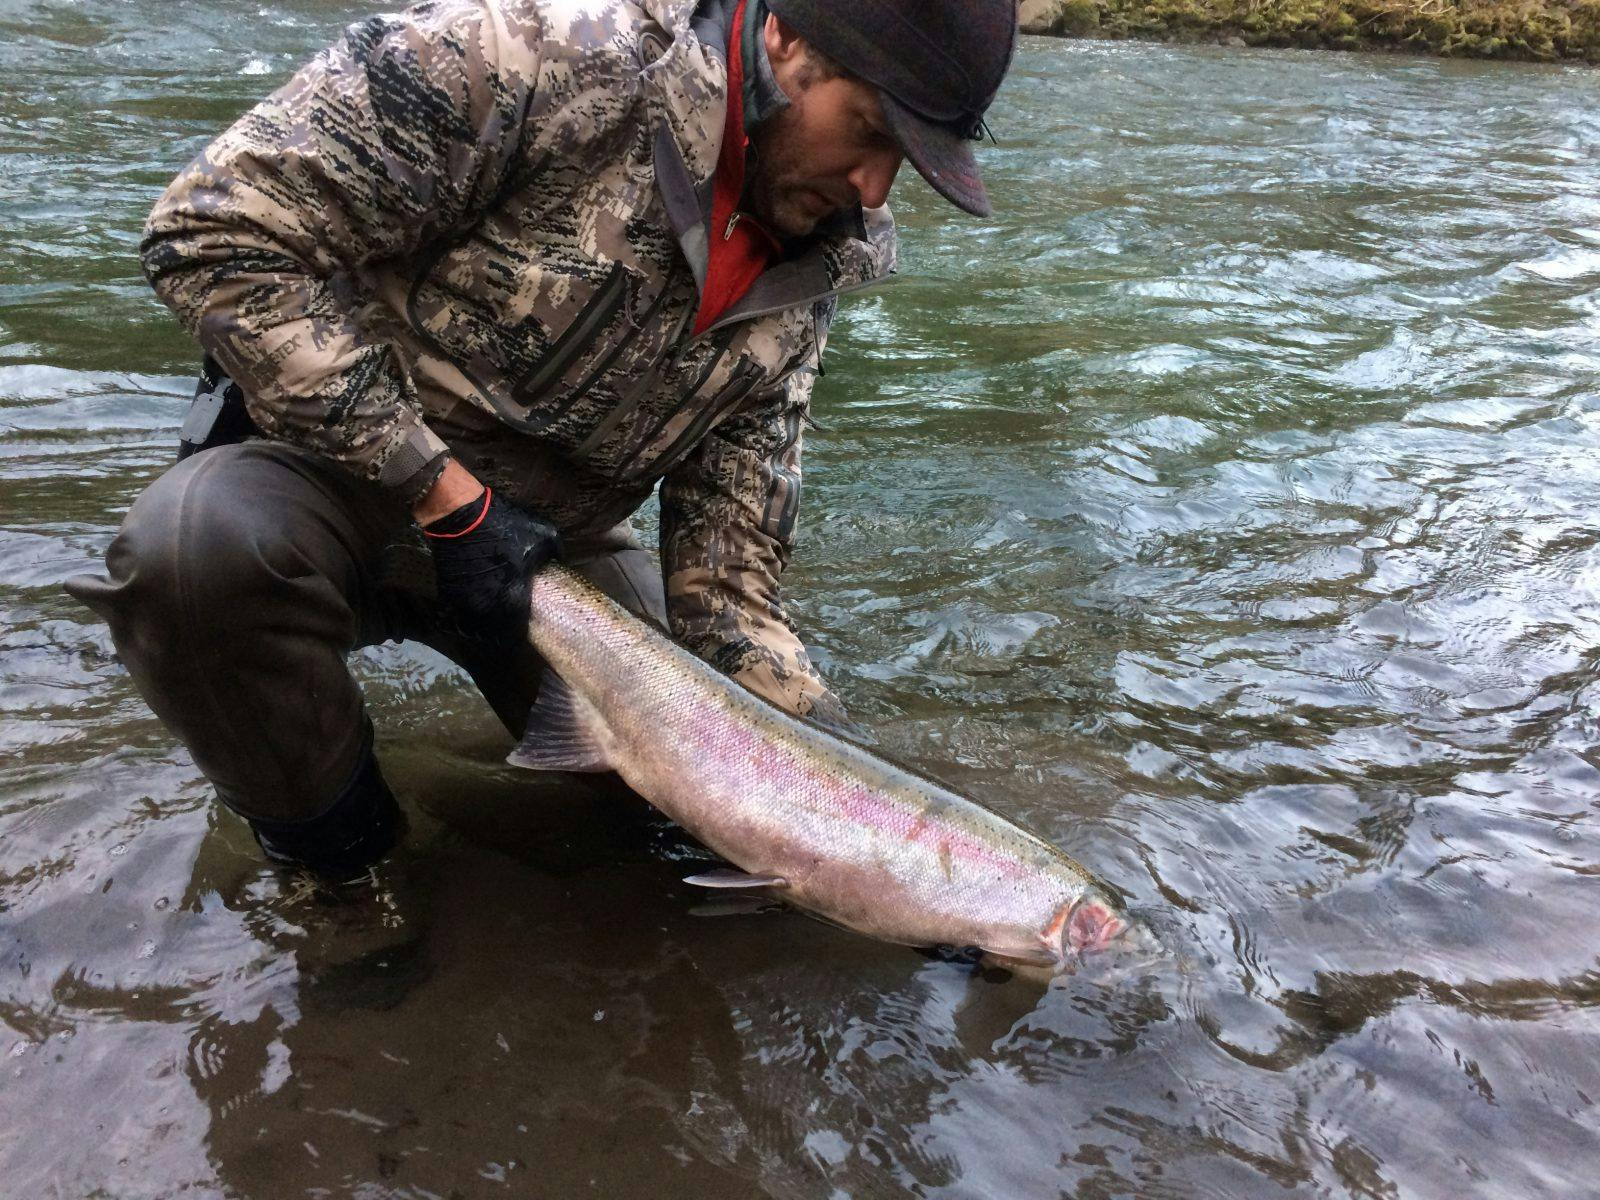 My good friend Eric Shoemaker caught and released this beautiful hatchery fish. It&#x2019;s a good reminder that we should only harvest what we intend to eat. This fish was carefully handled and safely released.